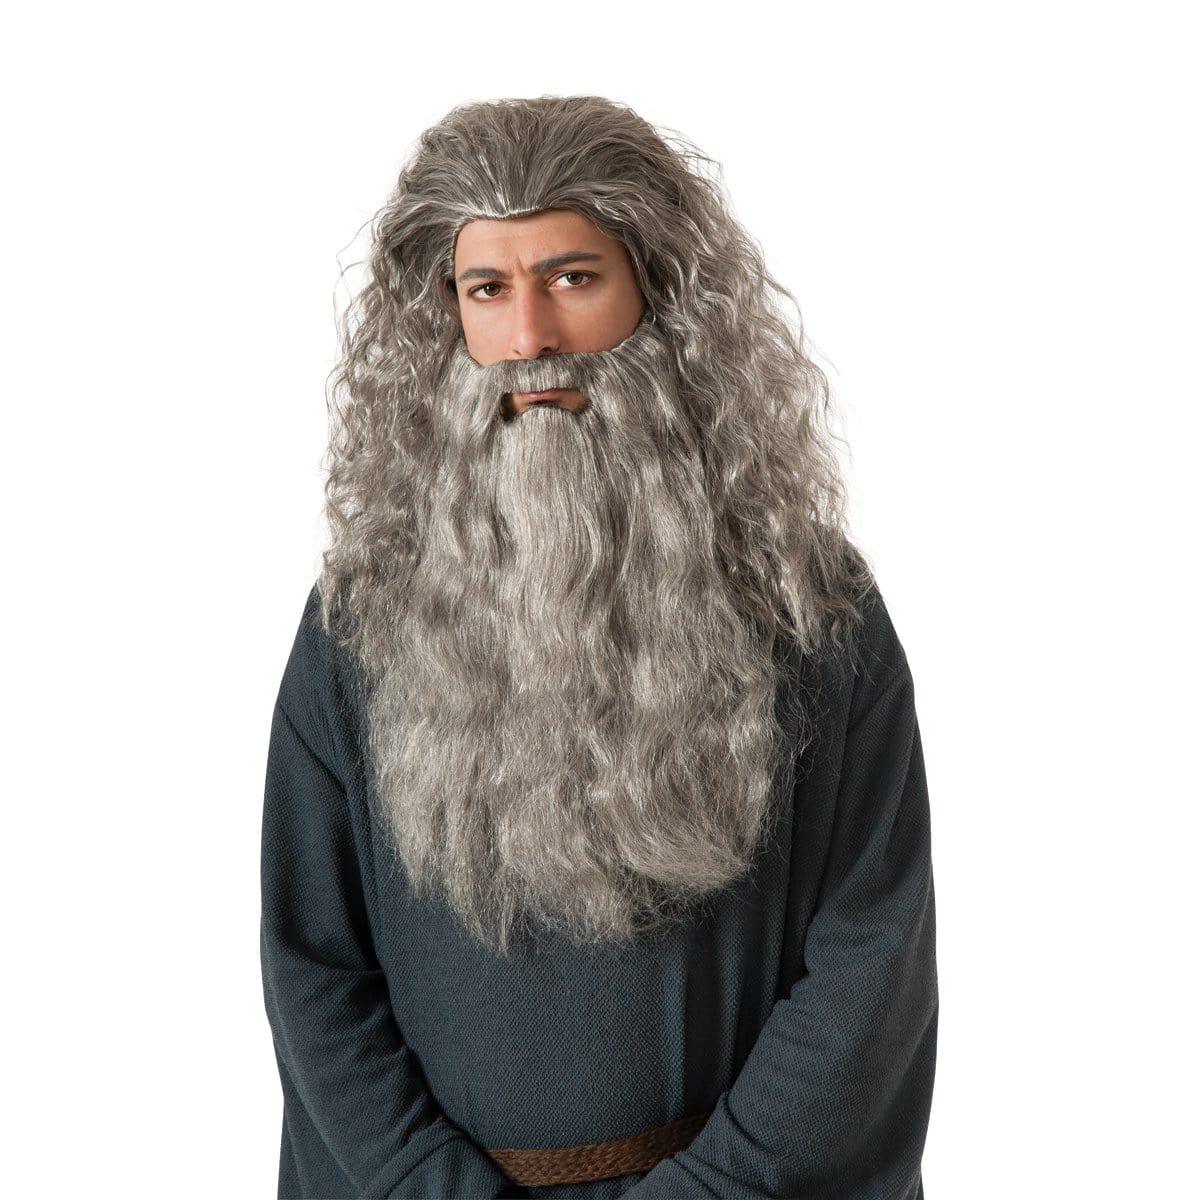 Buy Costume Accessories Gandalf wig & beard set for men, Lord of the Rings sold at Party Expert